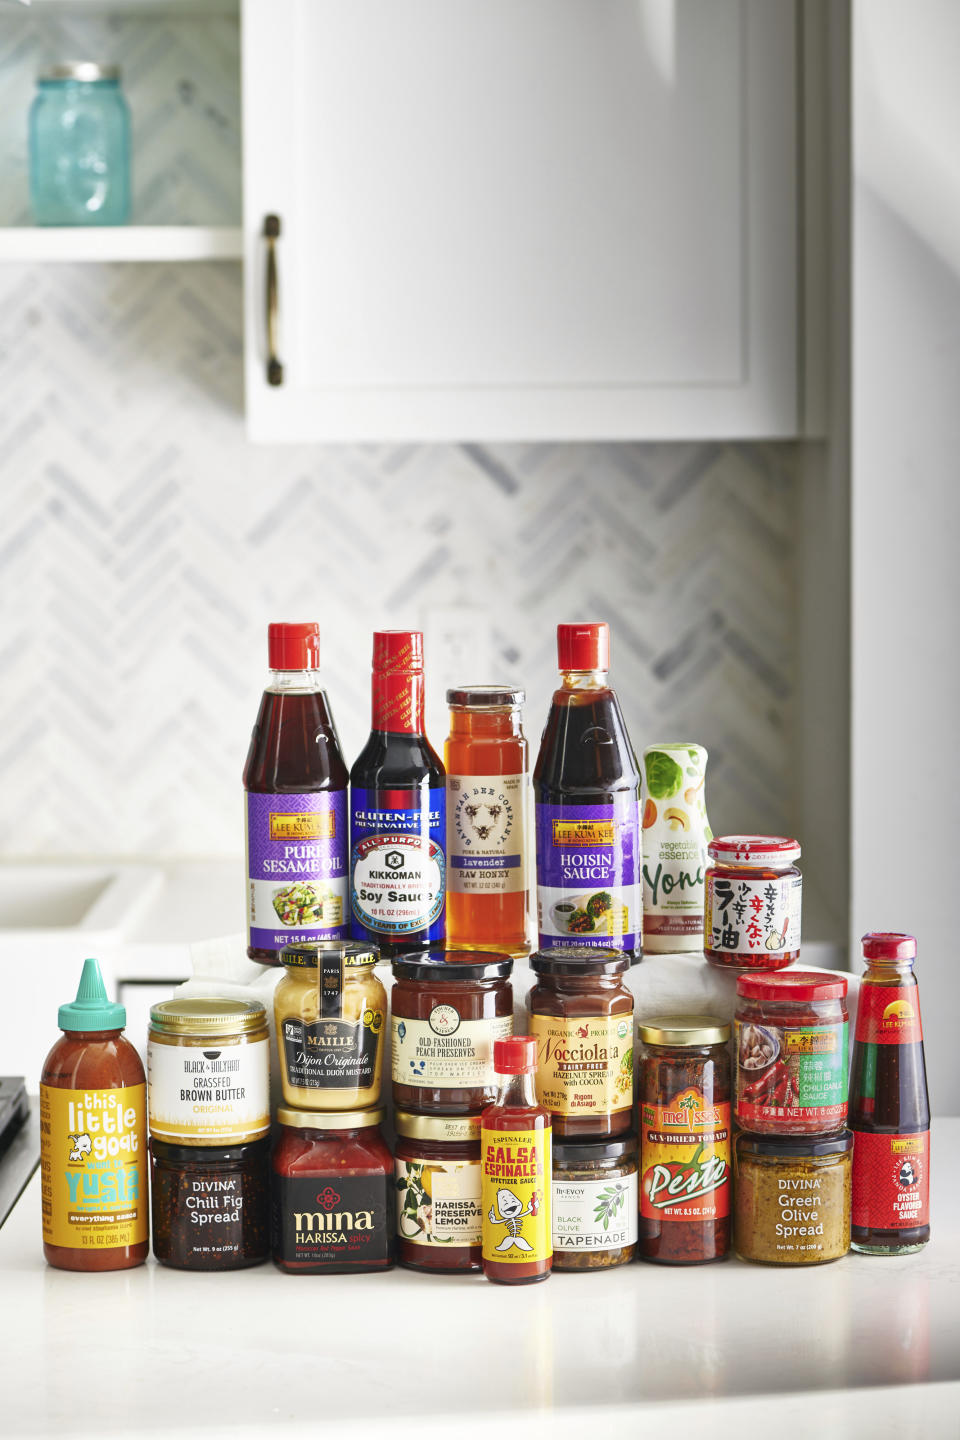 This December 2019 photo provided by Katie Workman shows a variety condiments on a counter in New York. To give your recipe repertoire a boost, pick up a few new condiments such as oyster sauce, Sriracha sauce, and a some fun preserves. (Cheyenne Cohen/Katie Workman via AP)